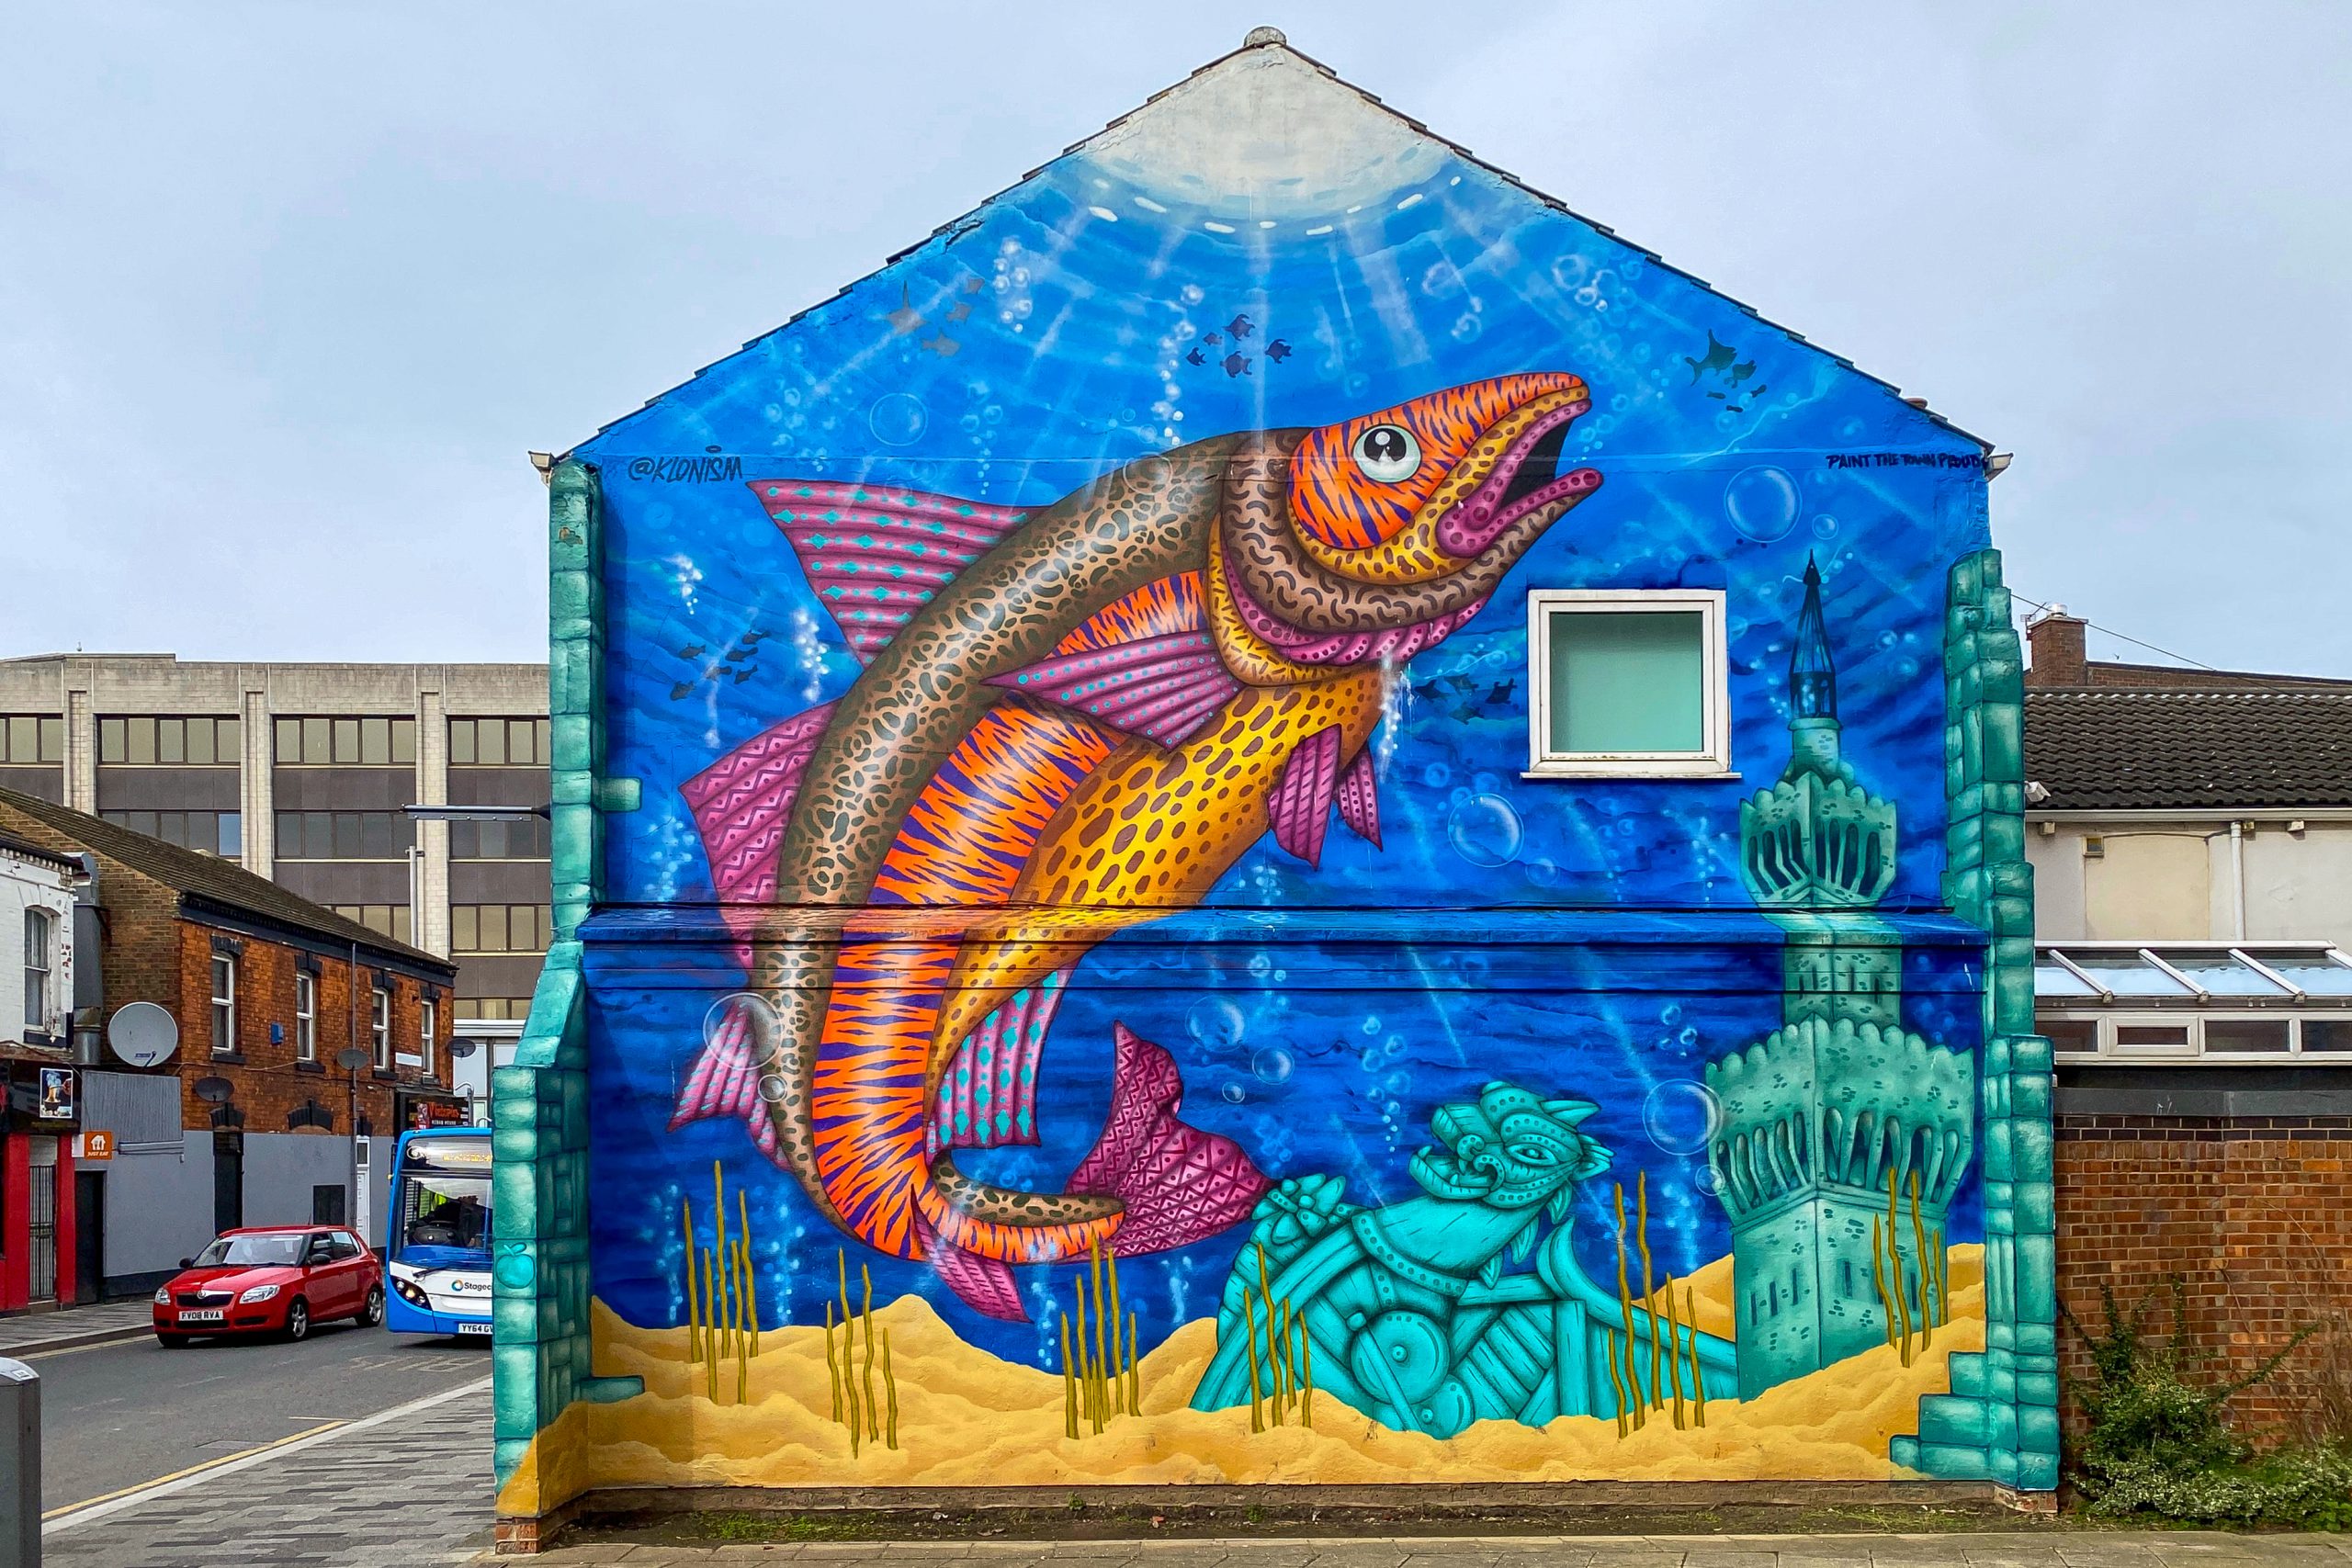 Harriet the Haddock mural by Creative Start as part of Paint the Town Proud.  Photo credit: Chris Frear.